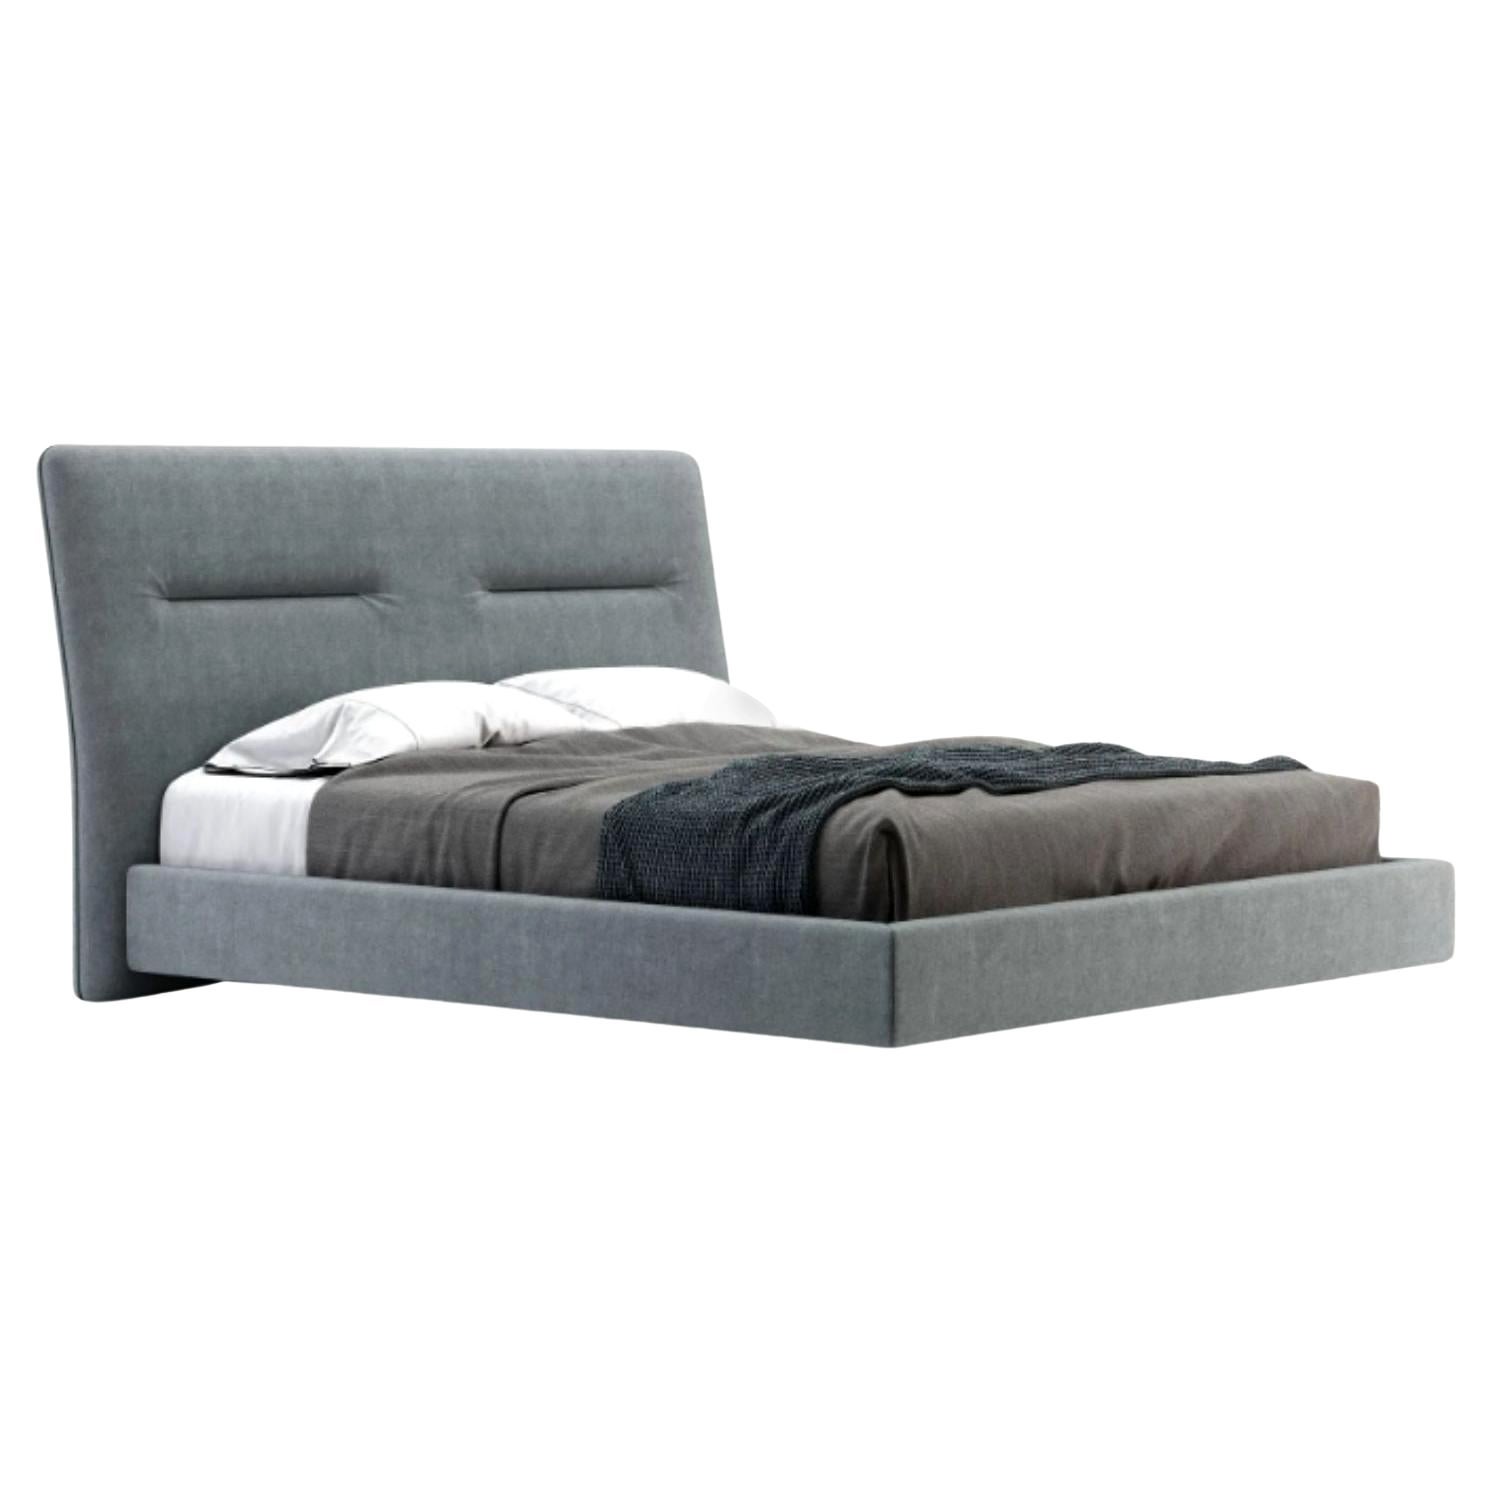 King Size Helen Bed by Domkapa For Sale